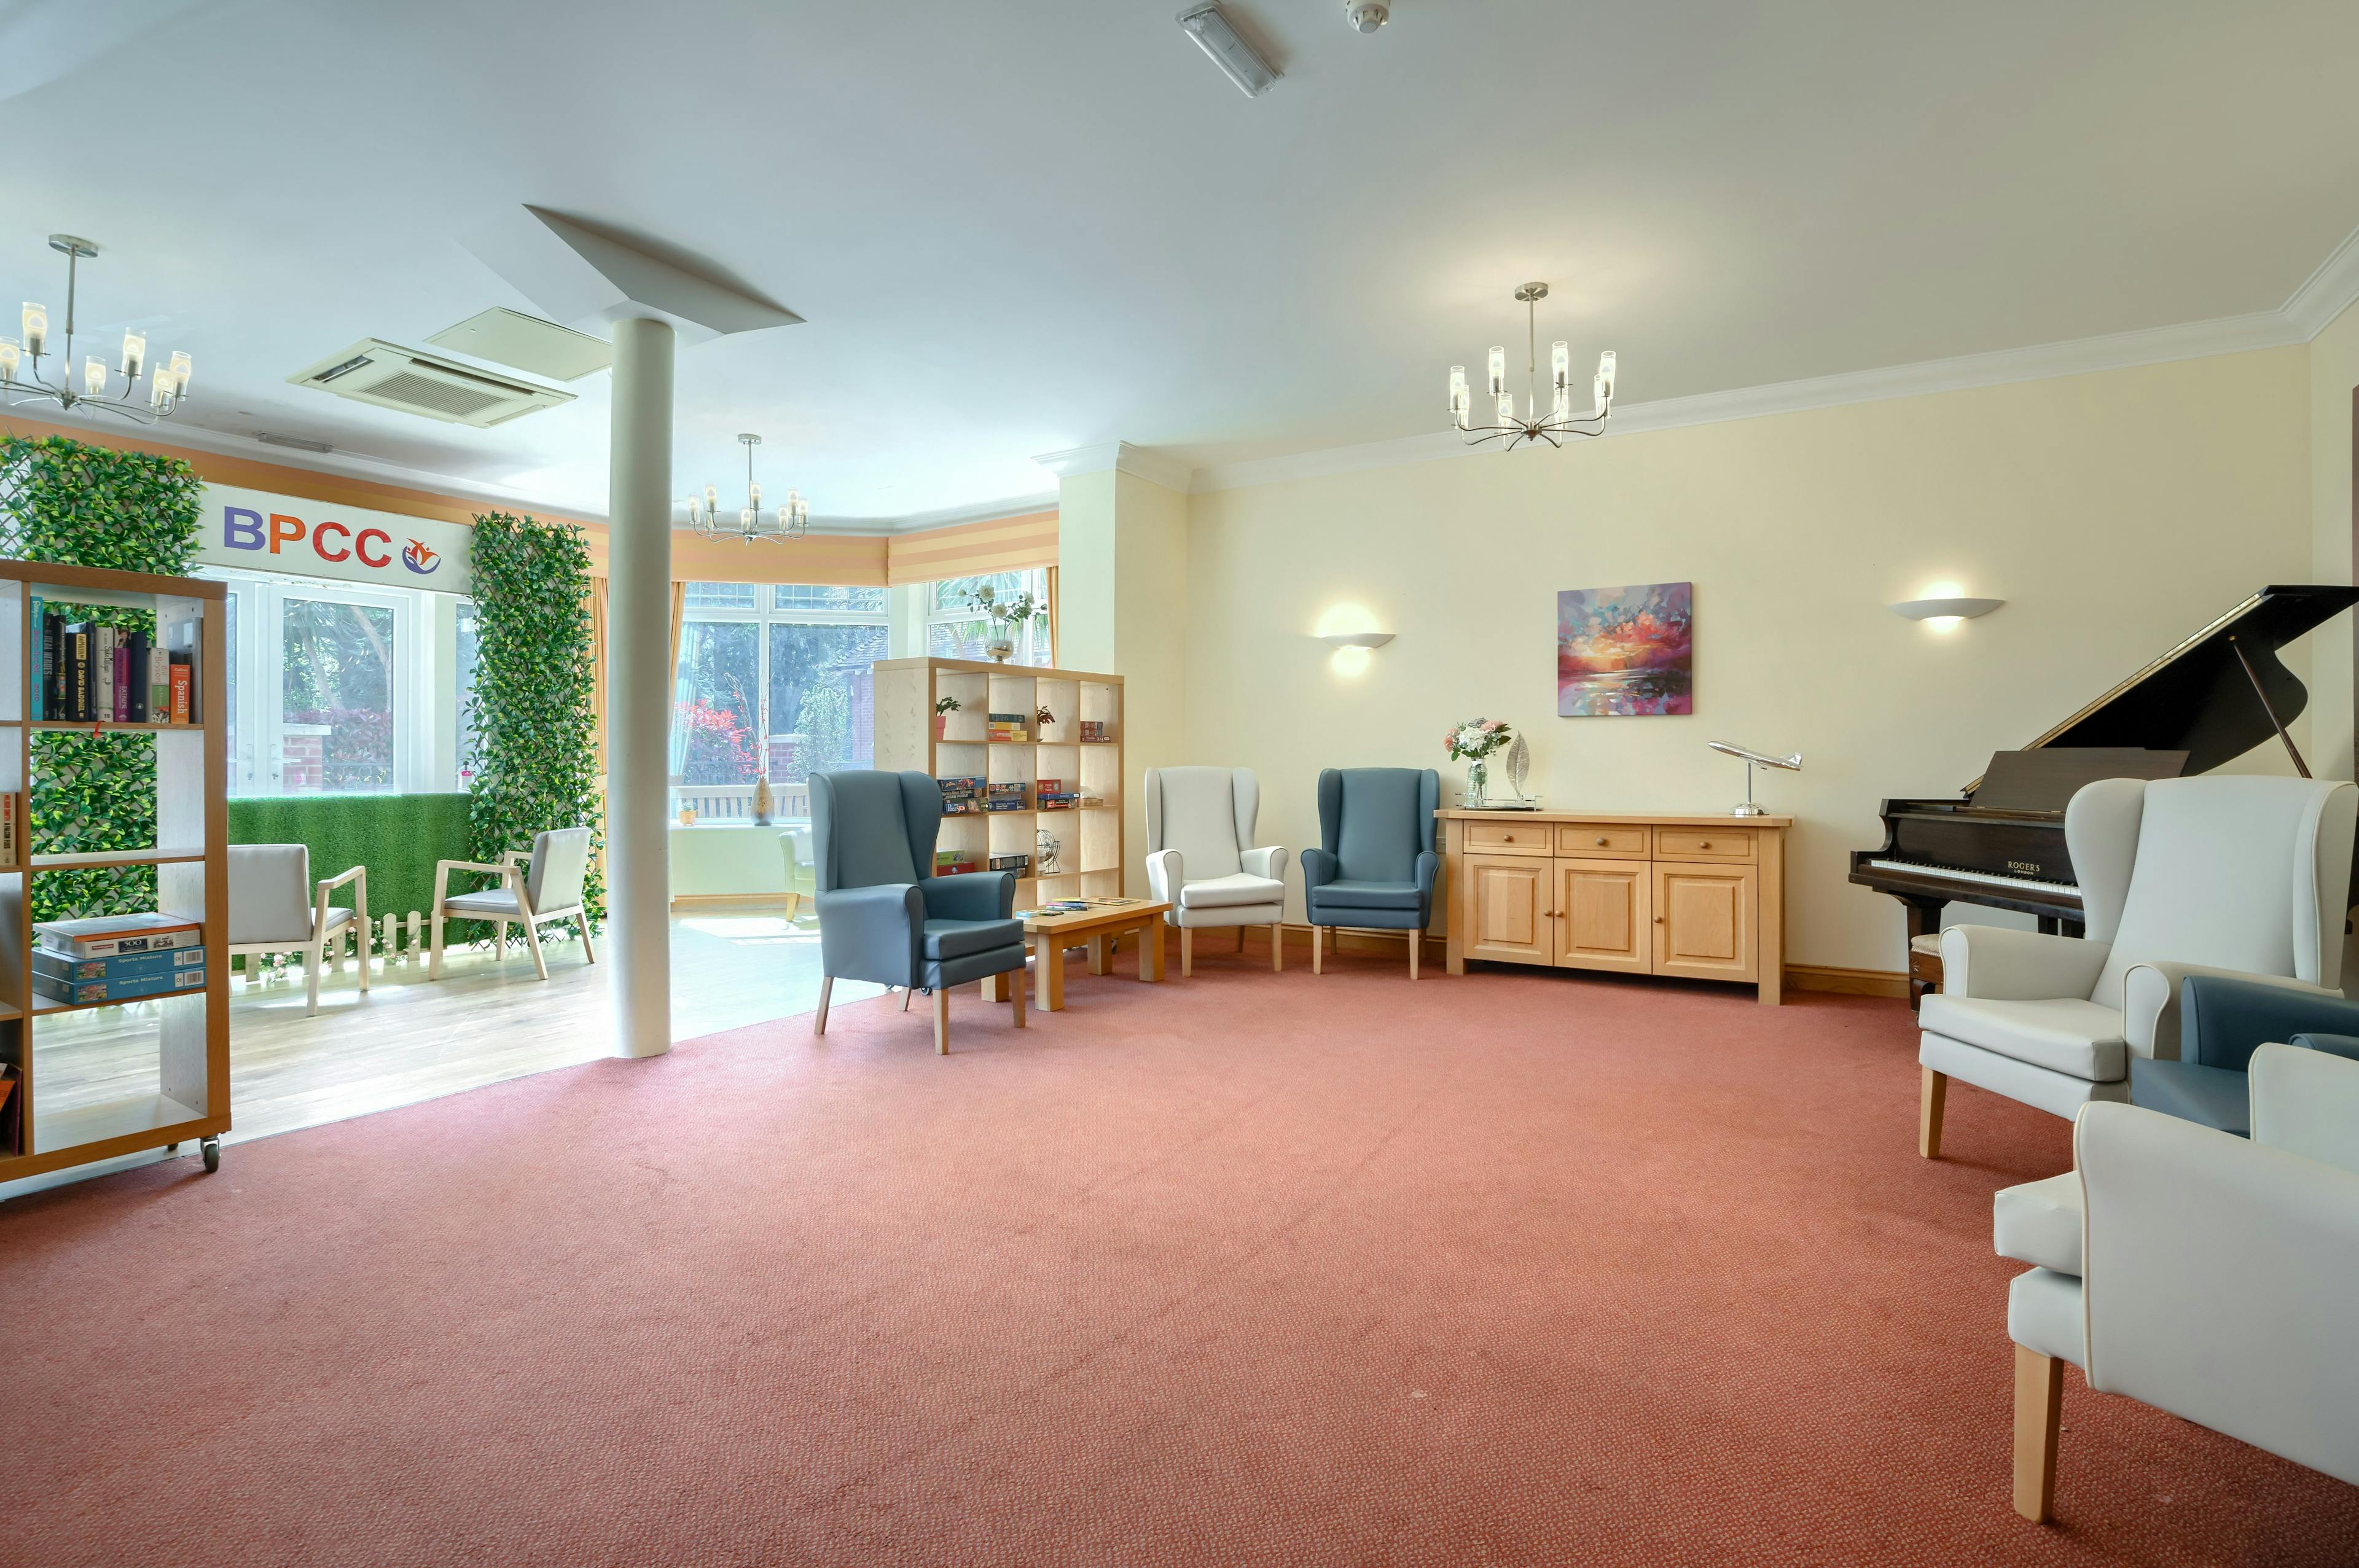 Lounge area of Branksome Park care home in Poole, Dorset